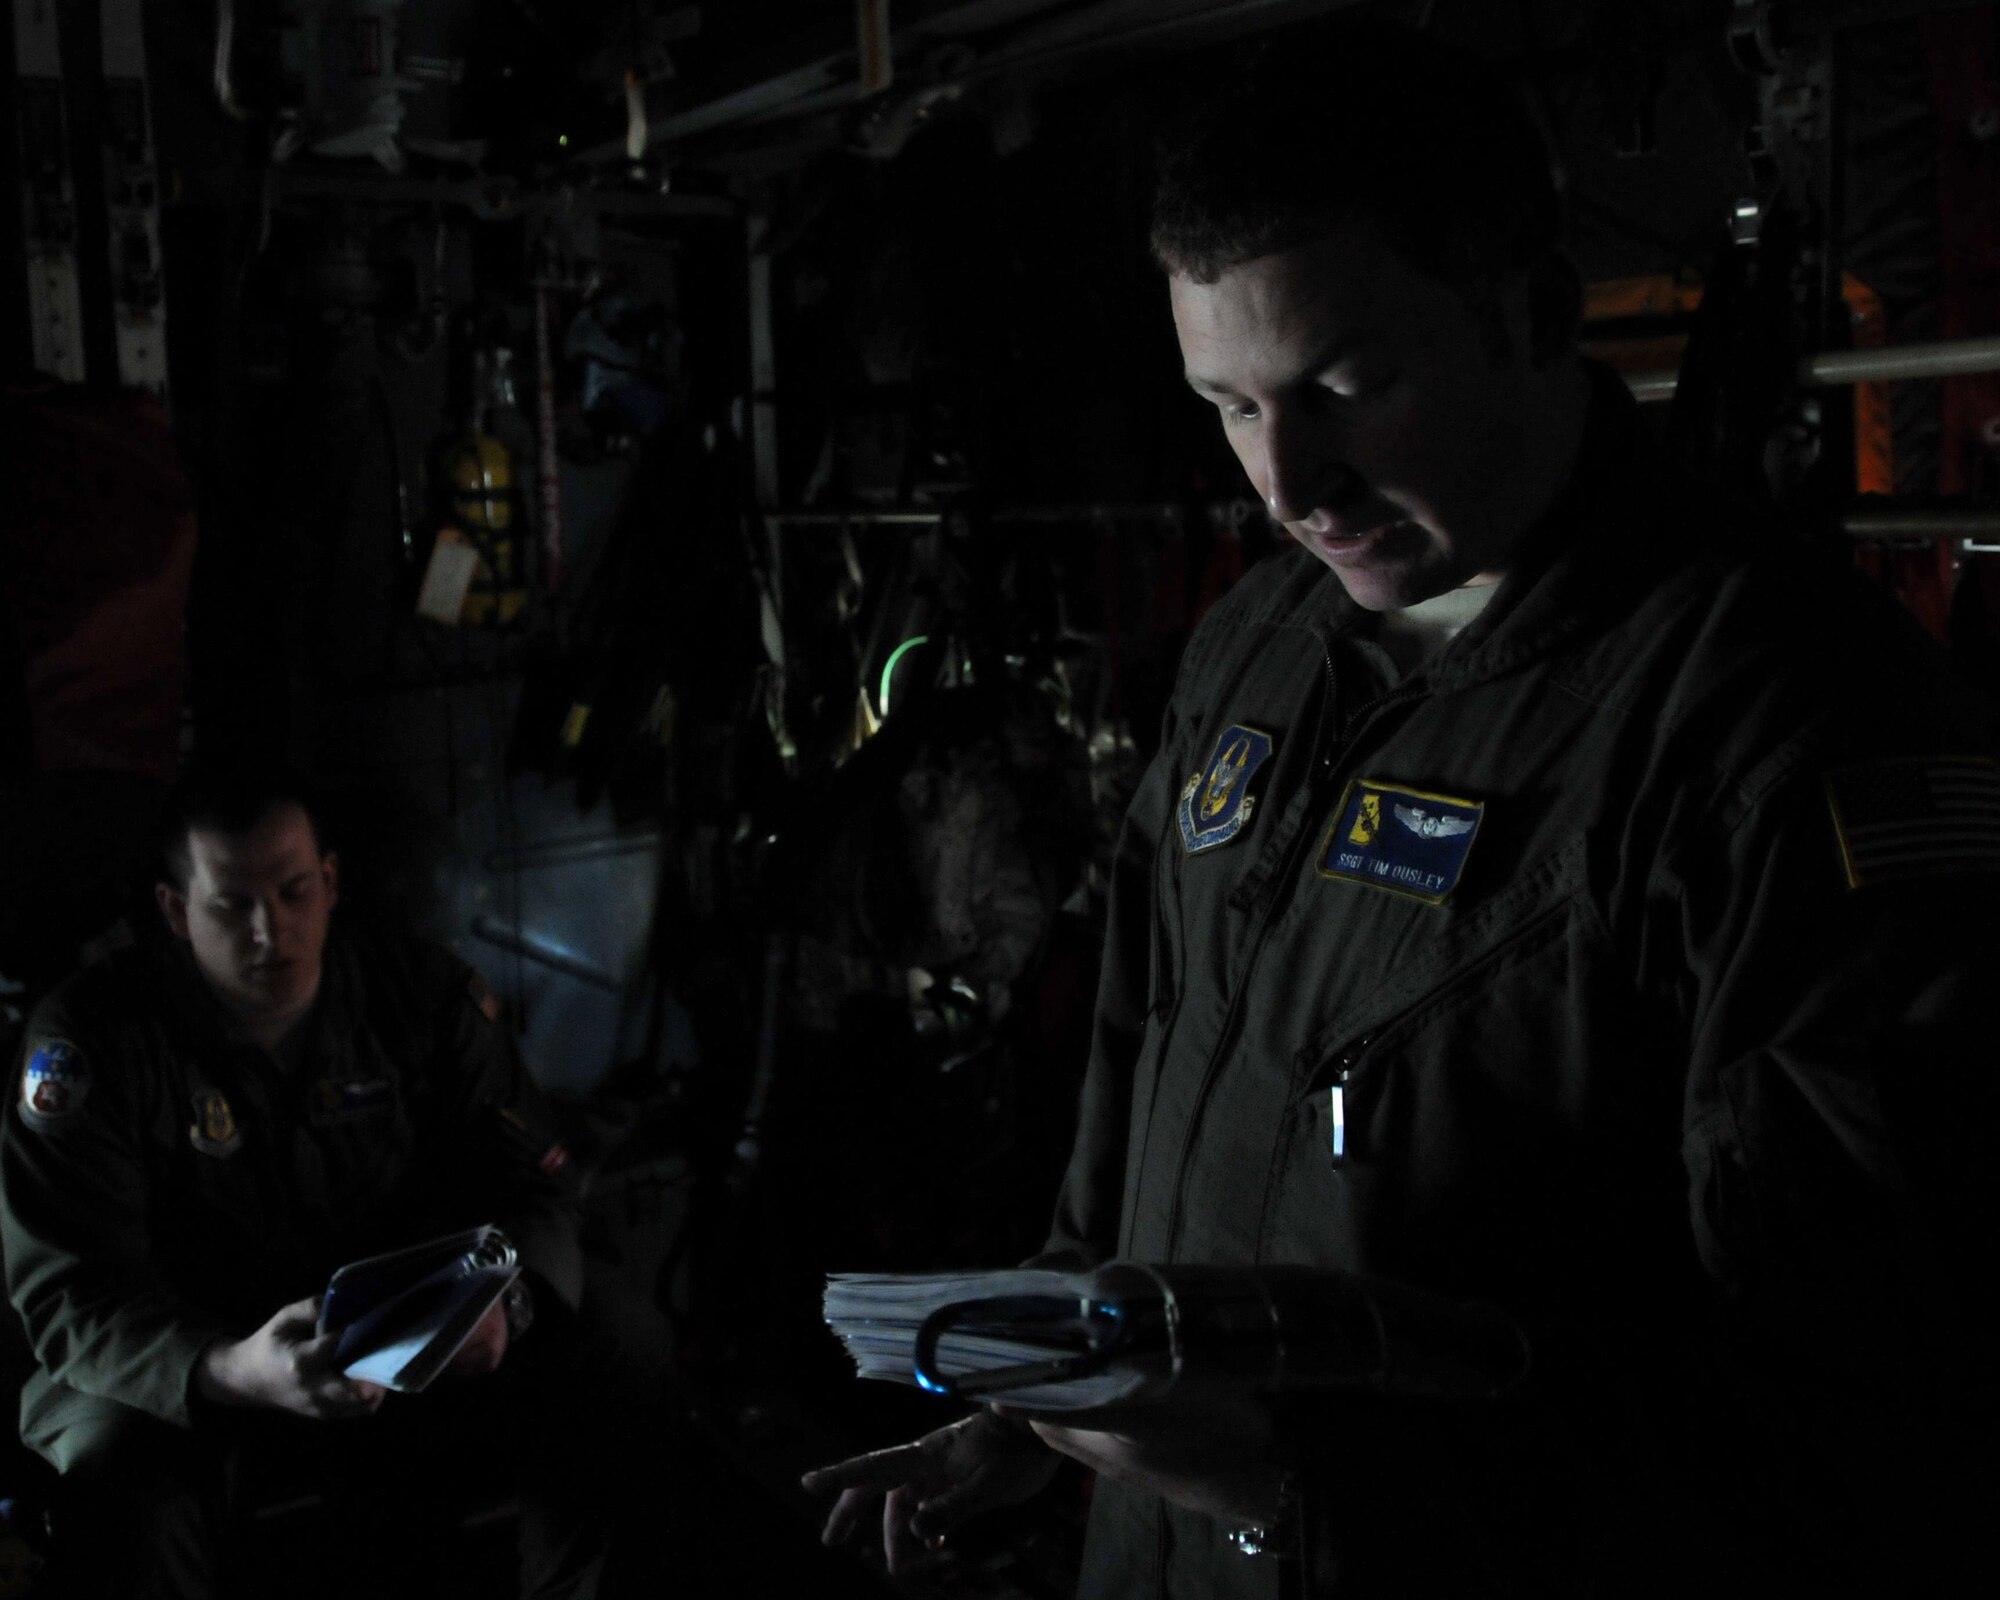 Staff Sgt. Tim Ousley, 700th Airlift Squadron loadmaster, briefs the airdrop checklist to SeniorAirman Brad Johnson, 700th AS loadmaster, in the cargo area of a C-130 Hercules at Aviano Air Base, Italy on April 11, 2016. The checklist provides a step-by-step process for preparing the C-130 for conducting airdrops. (U.S. Air Force photo/ Senior Airman Andrew J. Park)
